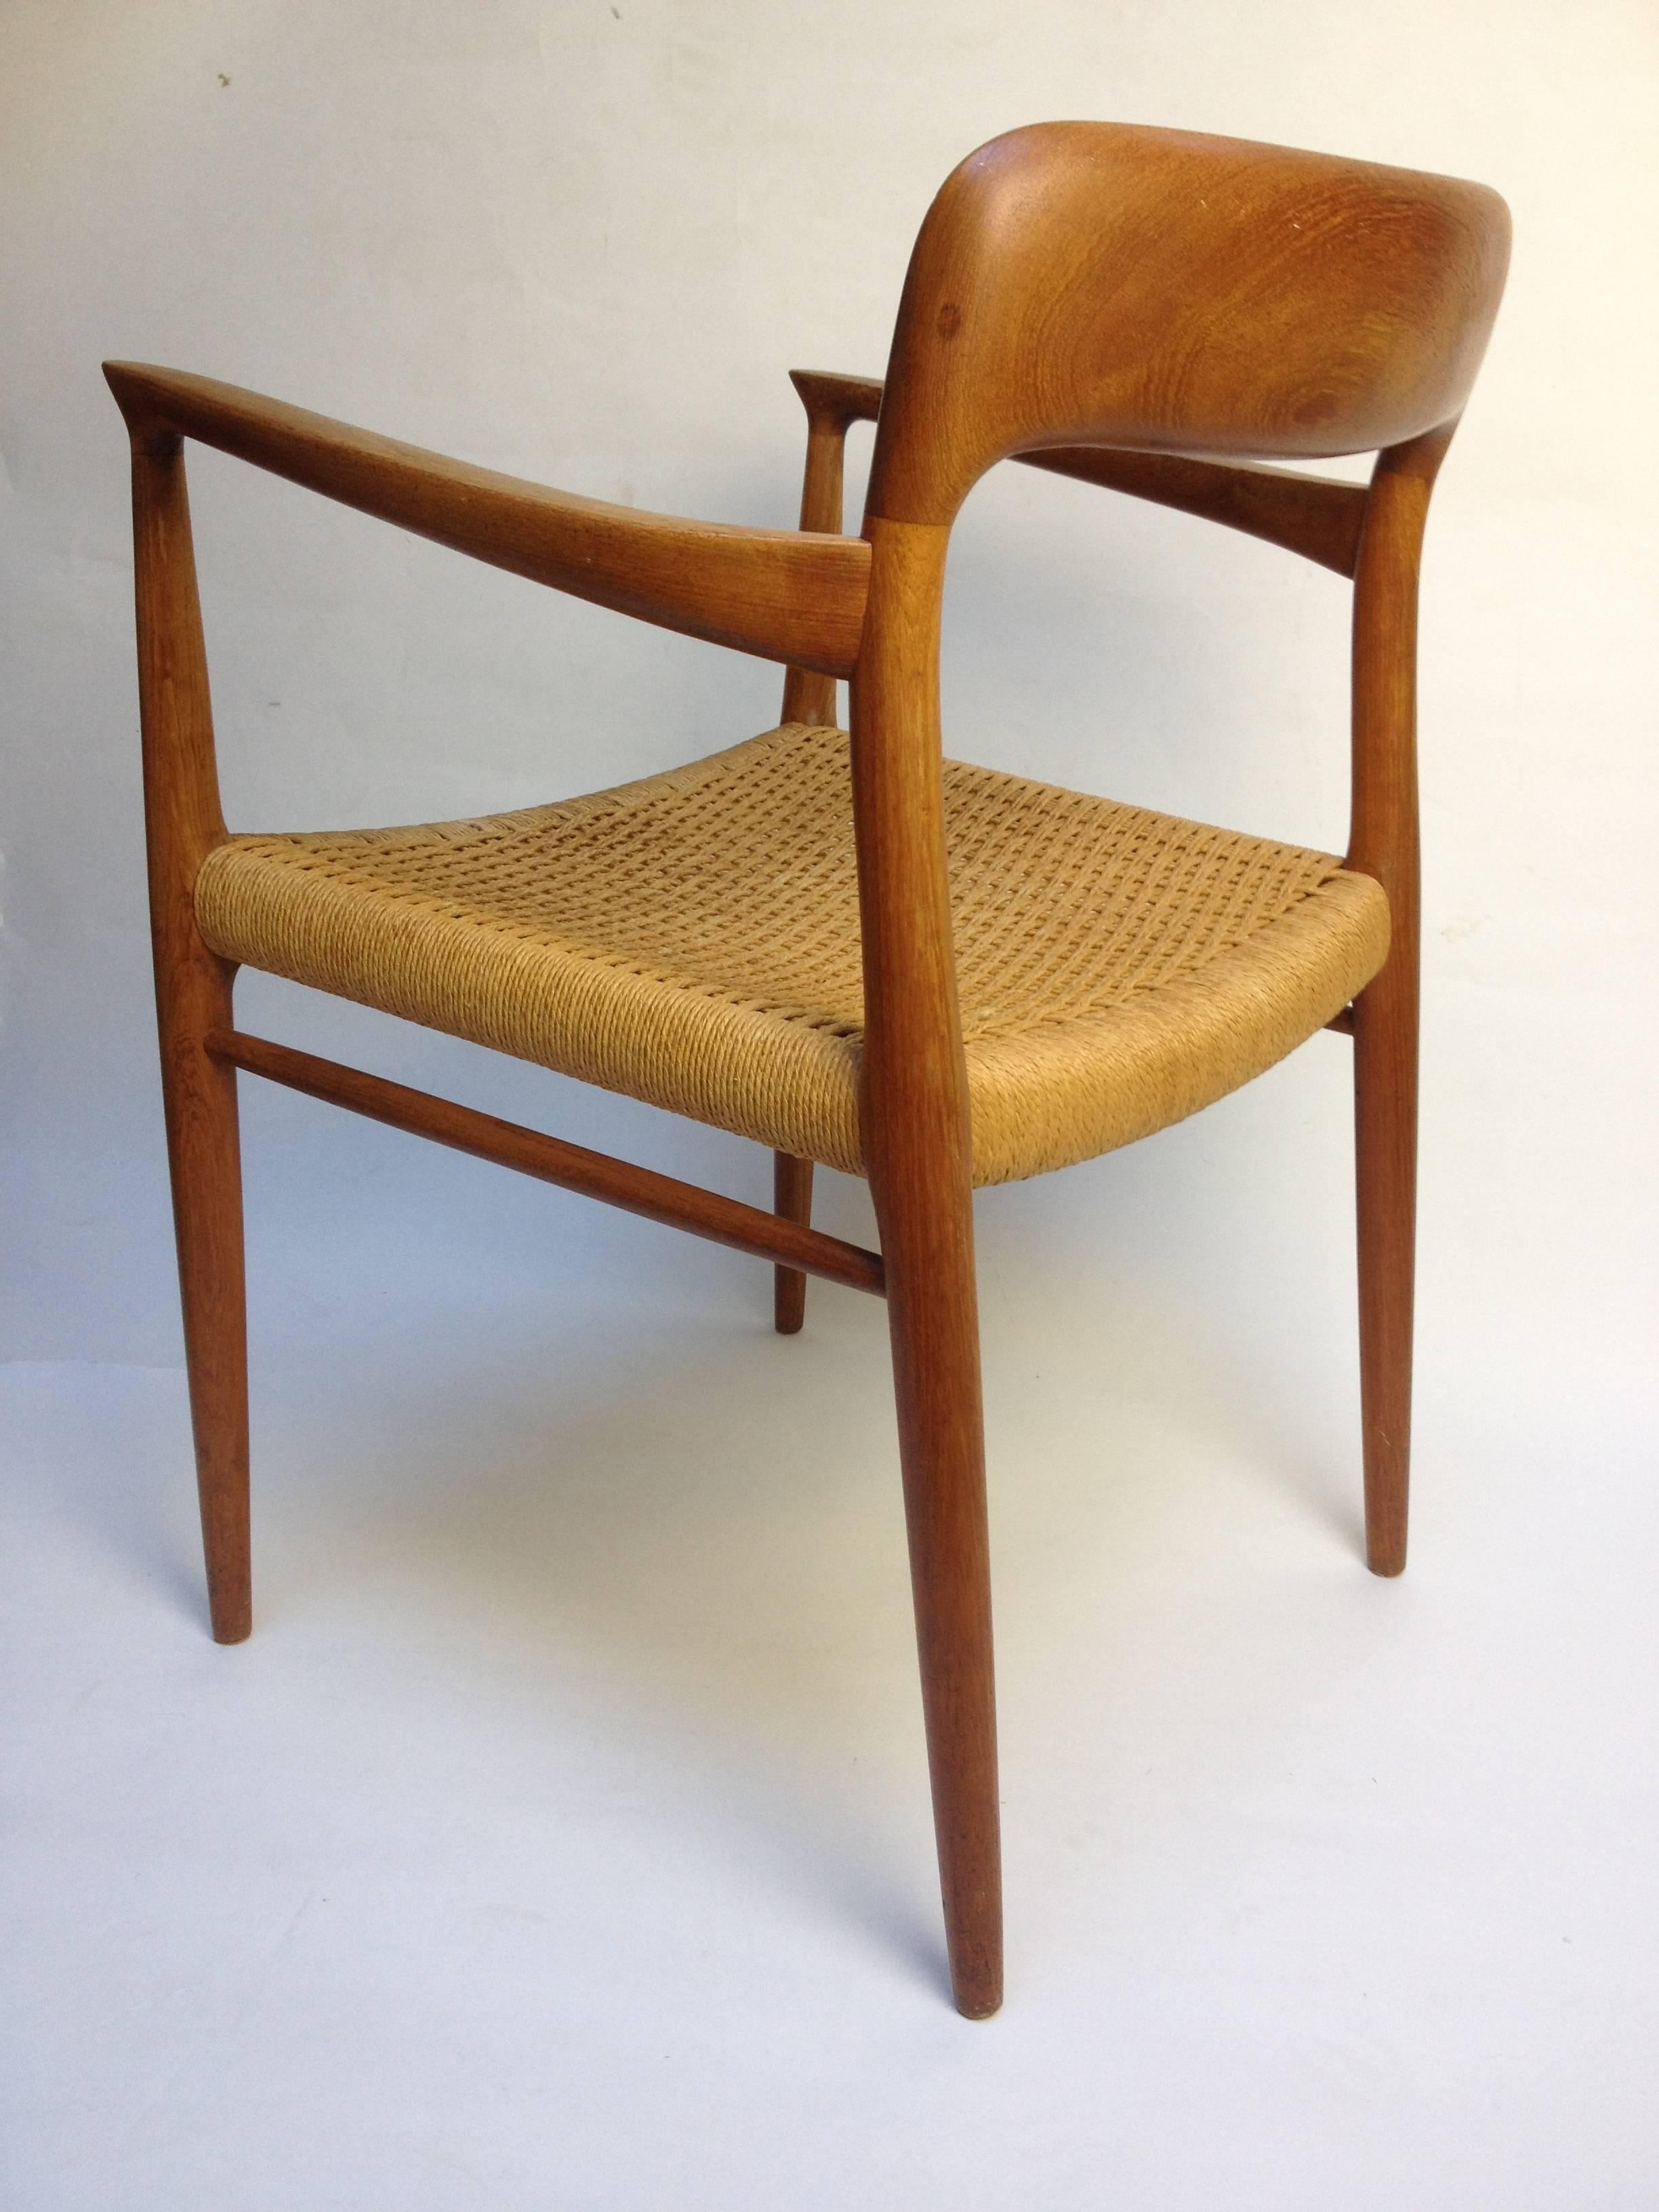 Incredible Mid-Century Modern quality teak carver (armchair) designed by Niels Moller for J.L. Moller. Made in Denmark, very good vintage condition. Perfect addition if you already have some of this model by J.L. Moller or would make a fabulous desk